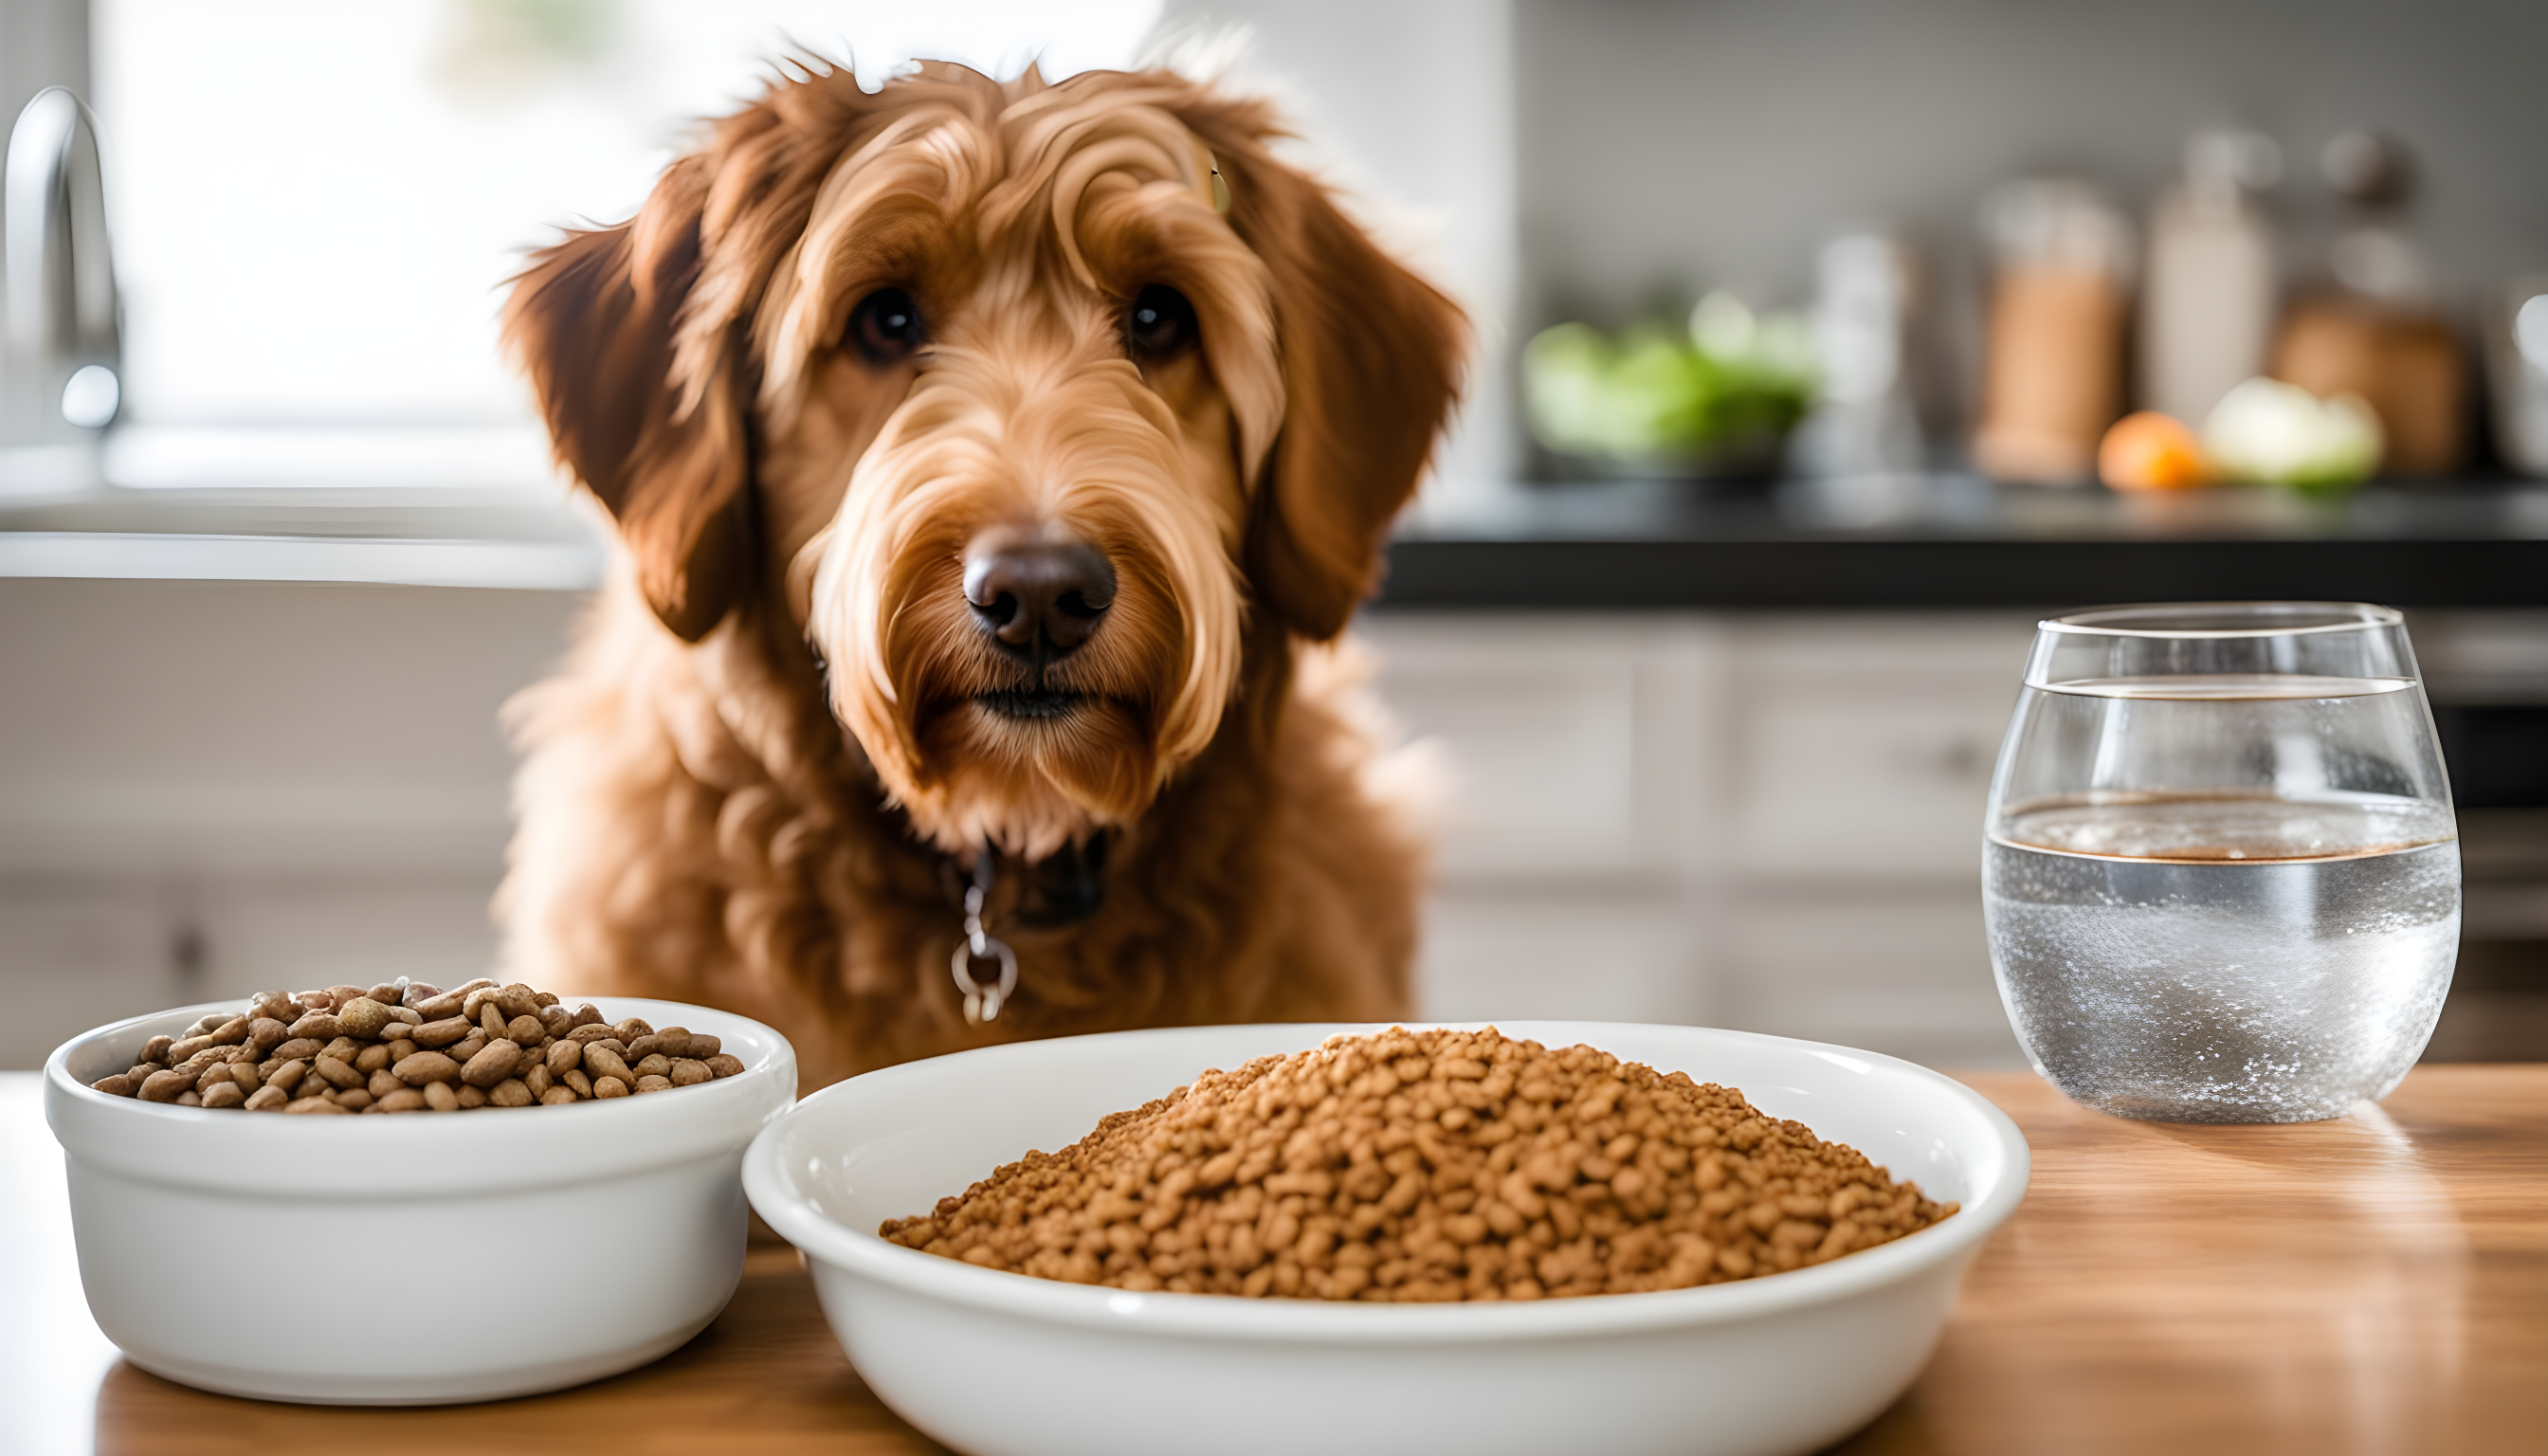 A bowl of high-quality dog food placed next to a bowl of fresh water, with a Labradoodle eagerly waiting to dig in.